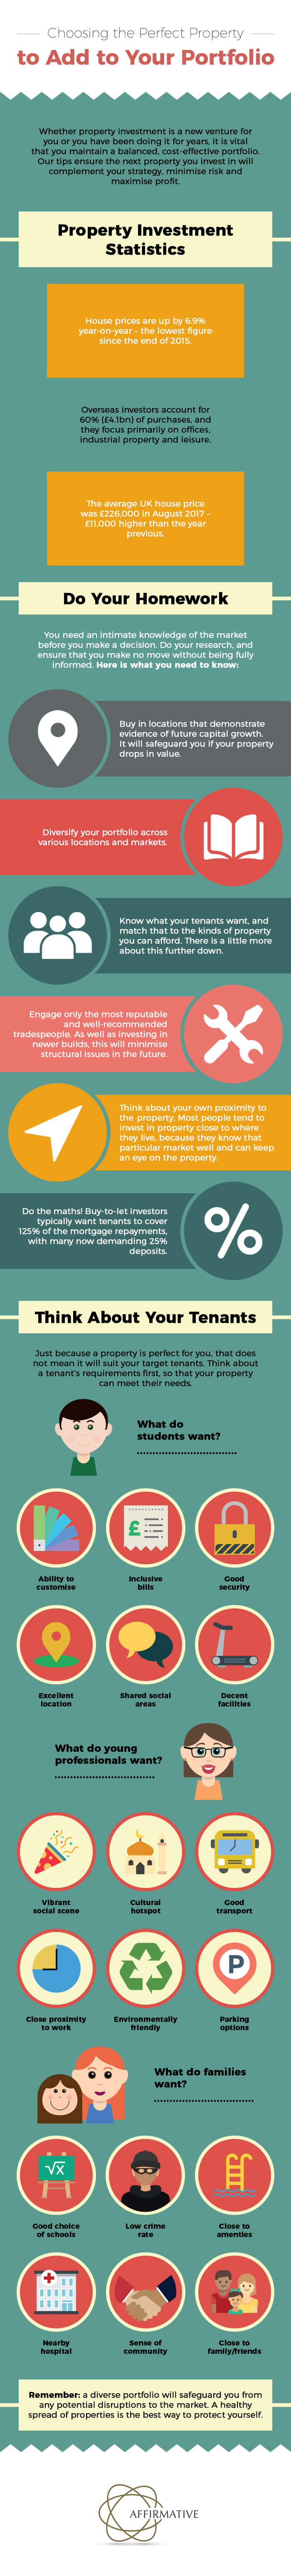 AF-Choosing-the-Perfect-Property-to-Add-to-Your-Portfolio-Infographic-LATEST1